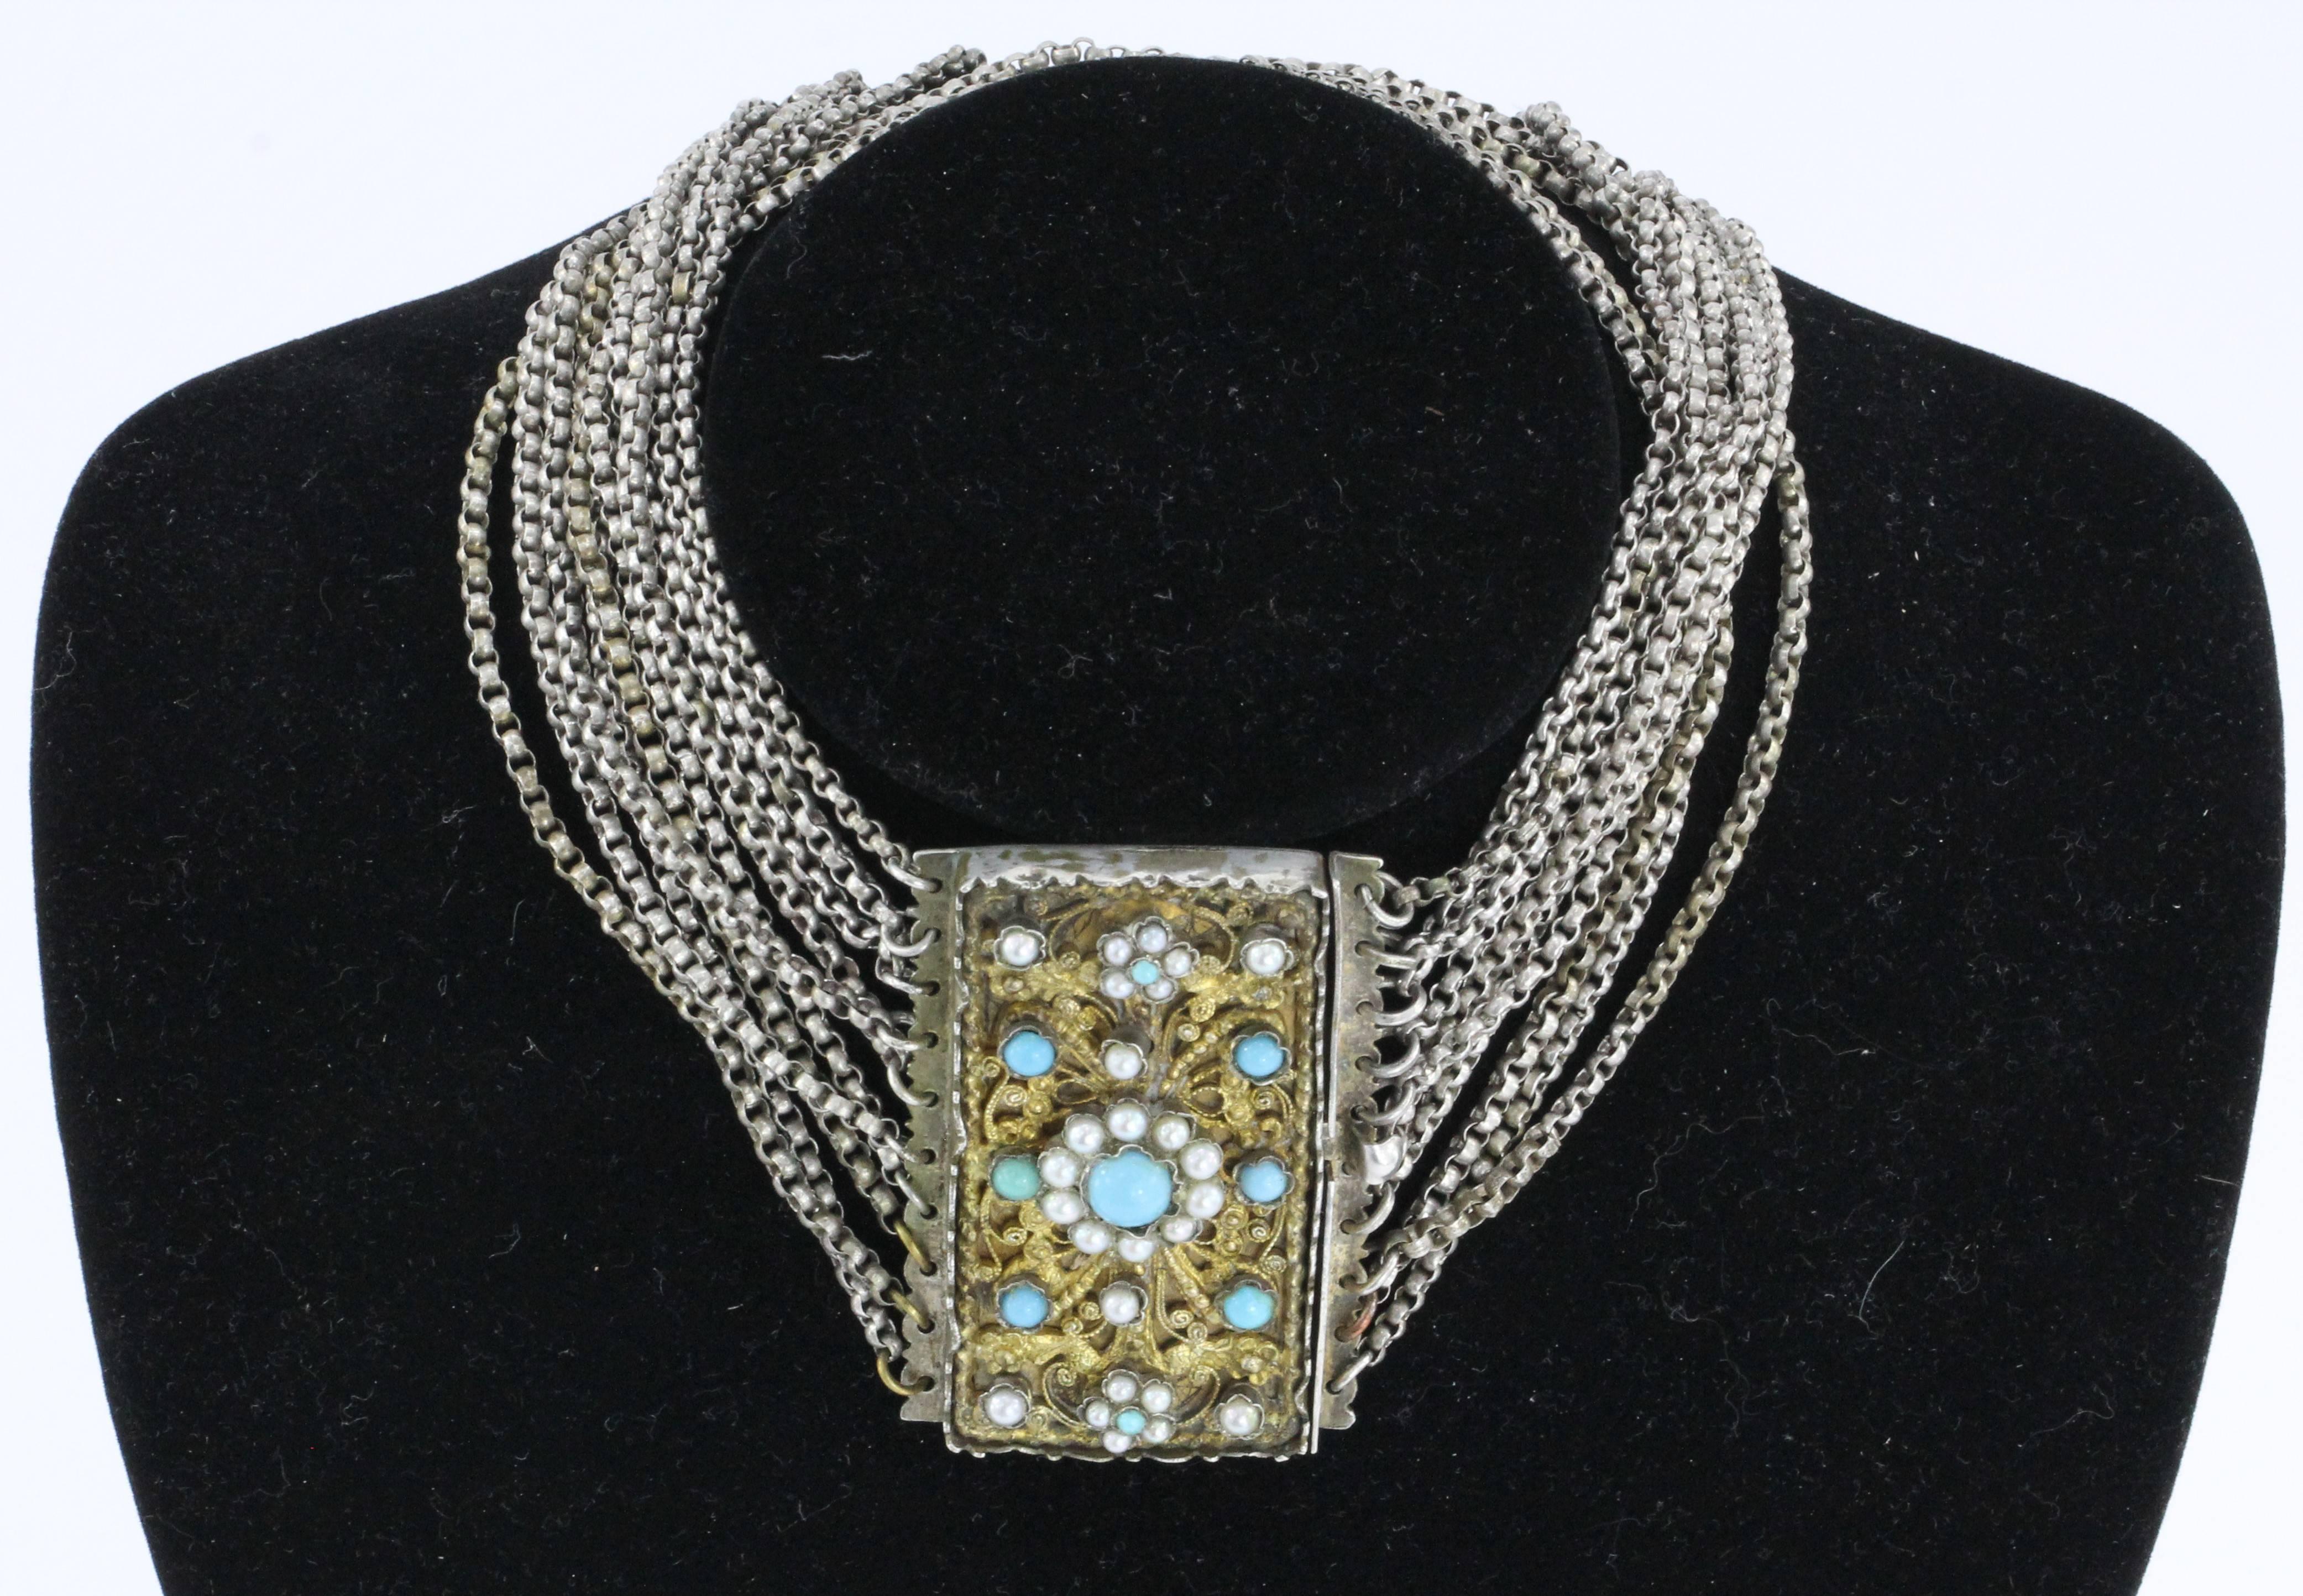 Antique 1840's Austrian Hungarian Silver Turquoise & Pearl Chunky Gilt Necklace. The piece is in excellent estate condition and ready to wear. The piece is hallmarked with the number 13. This is for the German / Austrian loth system and means the